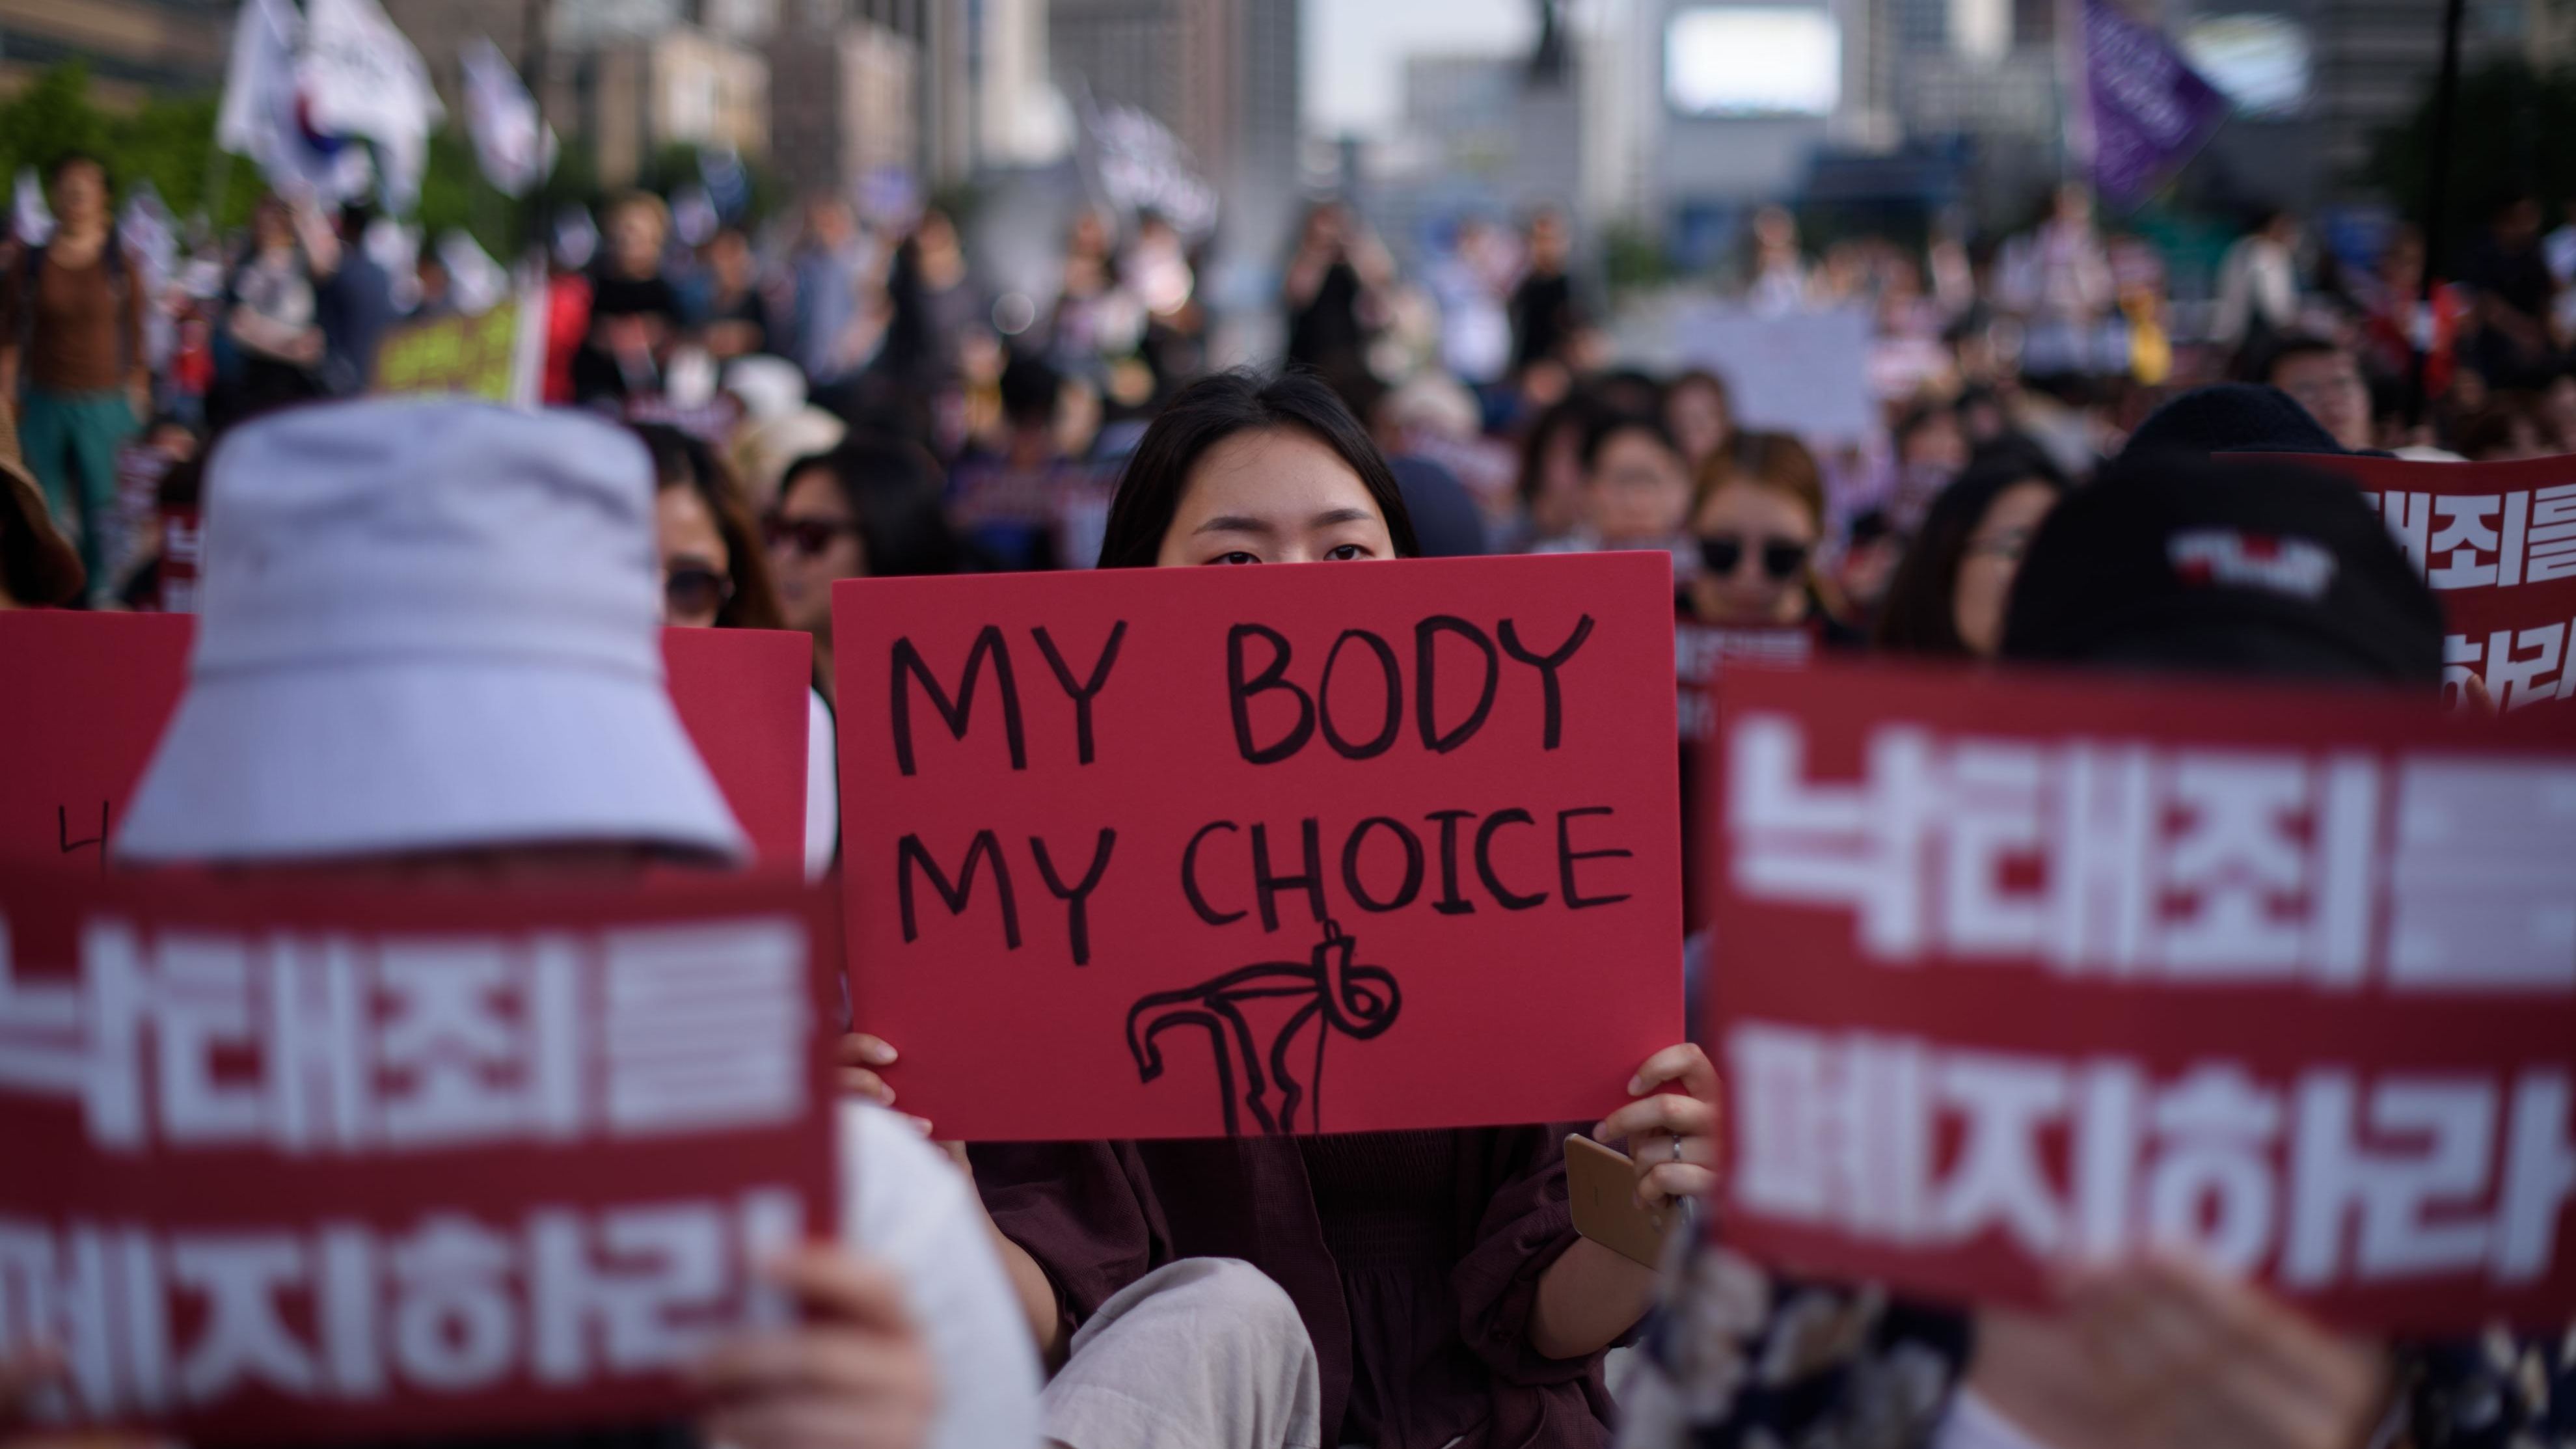 Protesters hold placards reading "Abolish punishment for abortion" as they protest South Korean abortion laws in Gwanghwamun plaza in Seoul on July 7, 2018.